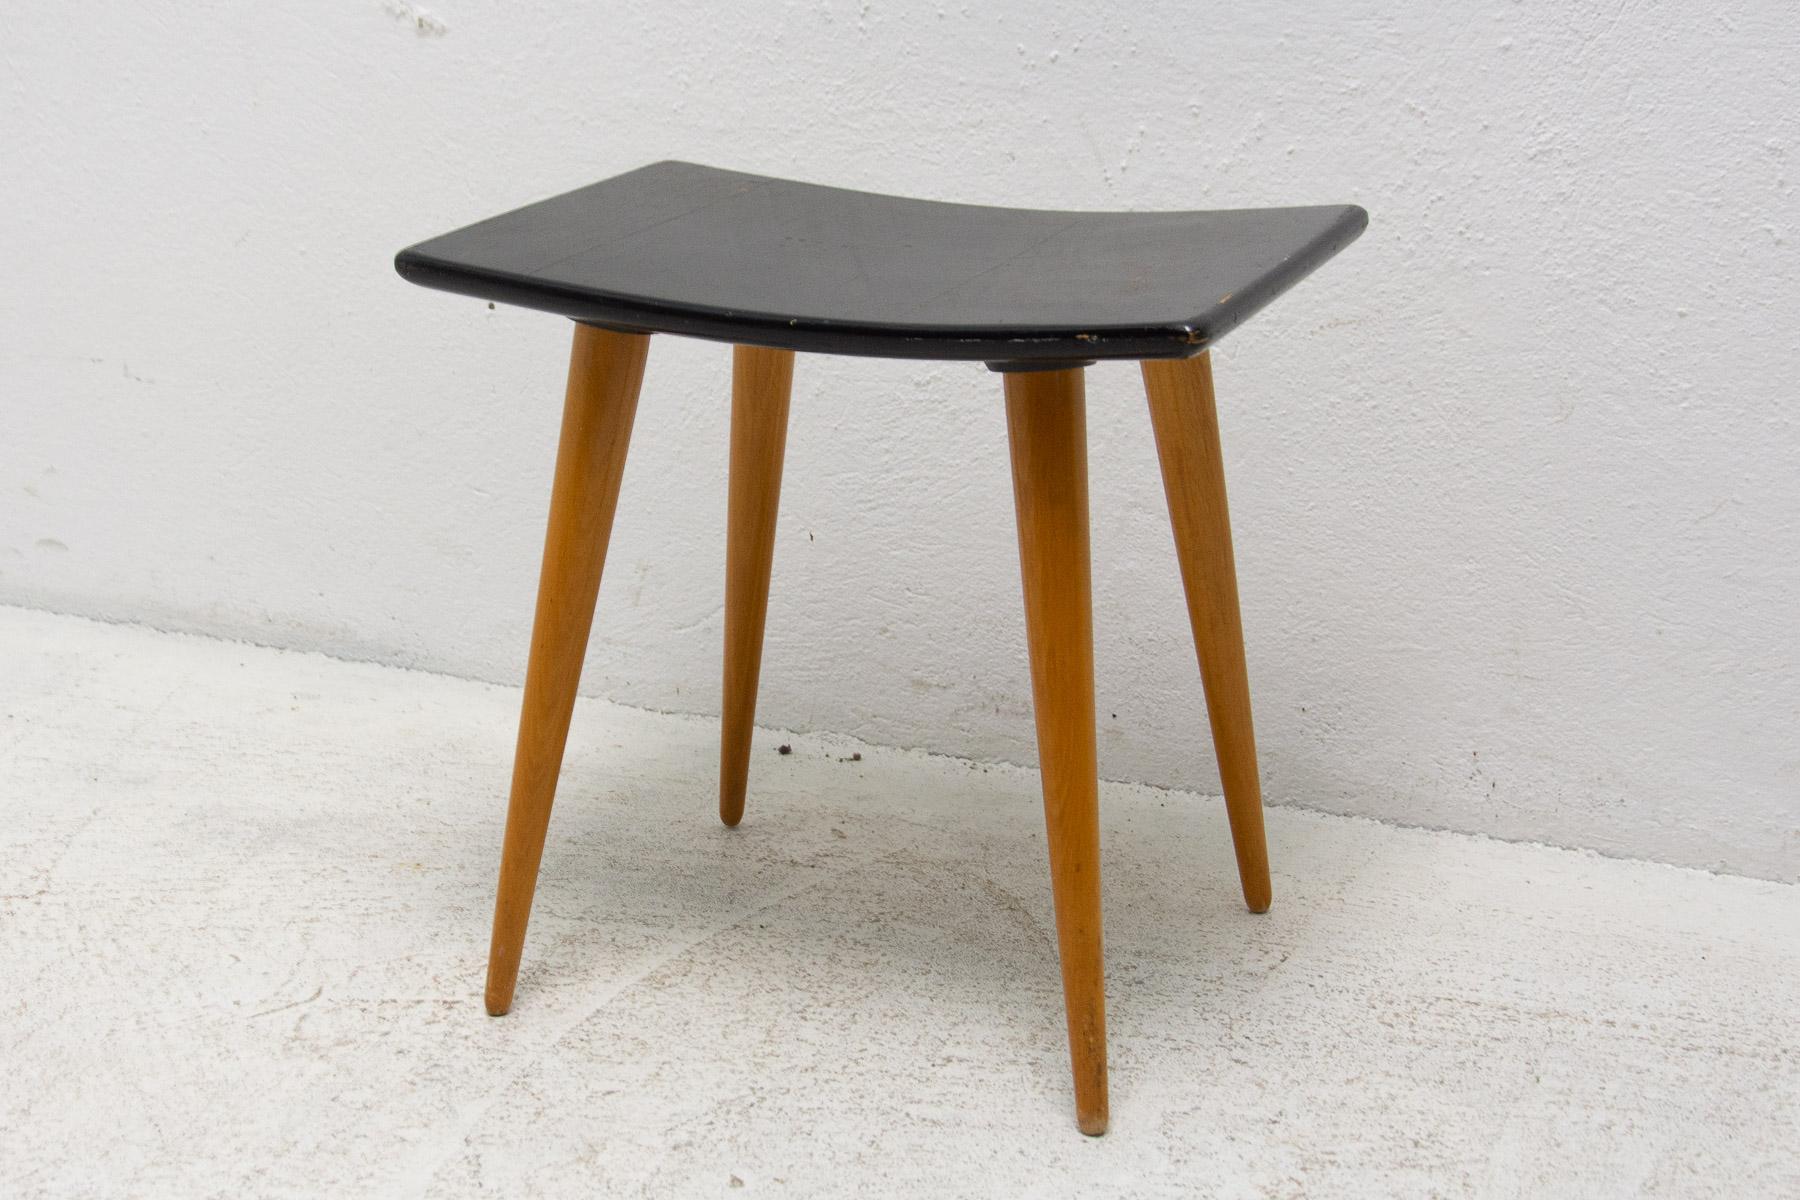 This stool/footrest was made by Západoslovenské nábytkárské Závody in the former Czechoslovakia in the 1970´s. It features plastic seat and the structure is made of beech wood. In good Vintage condition.

Measures: Height: 41 cm

Width: 41